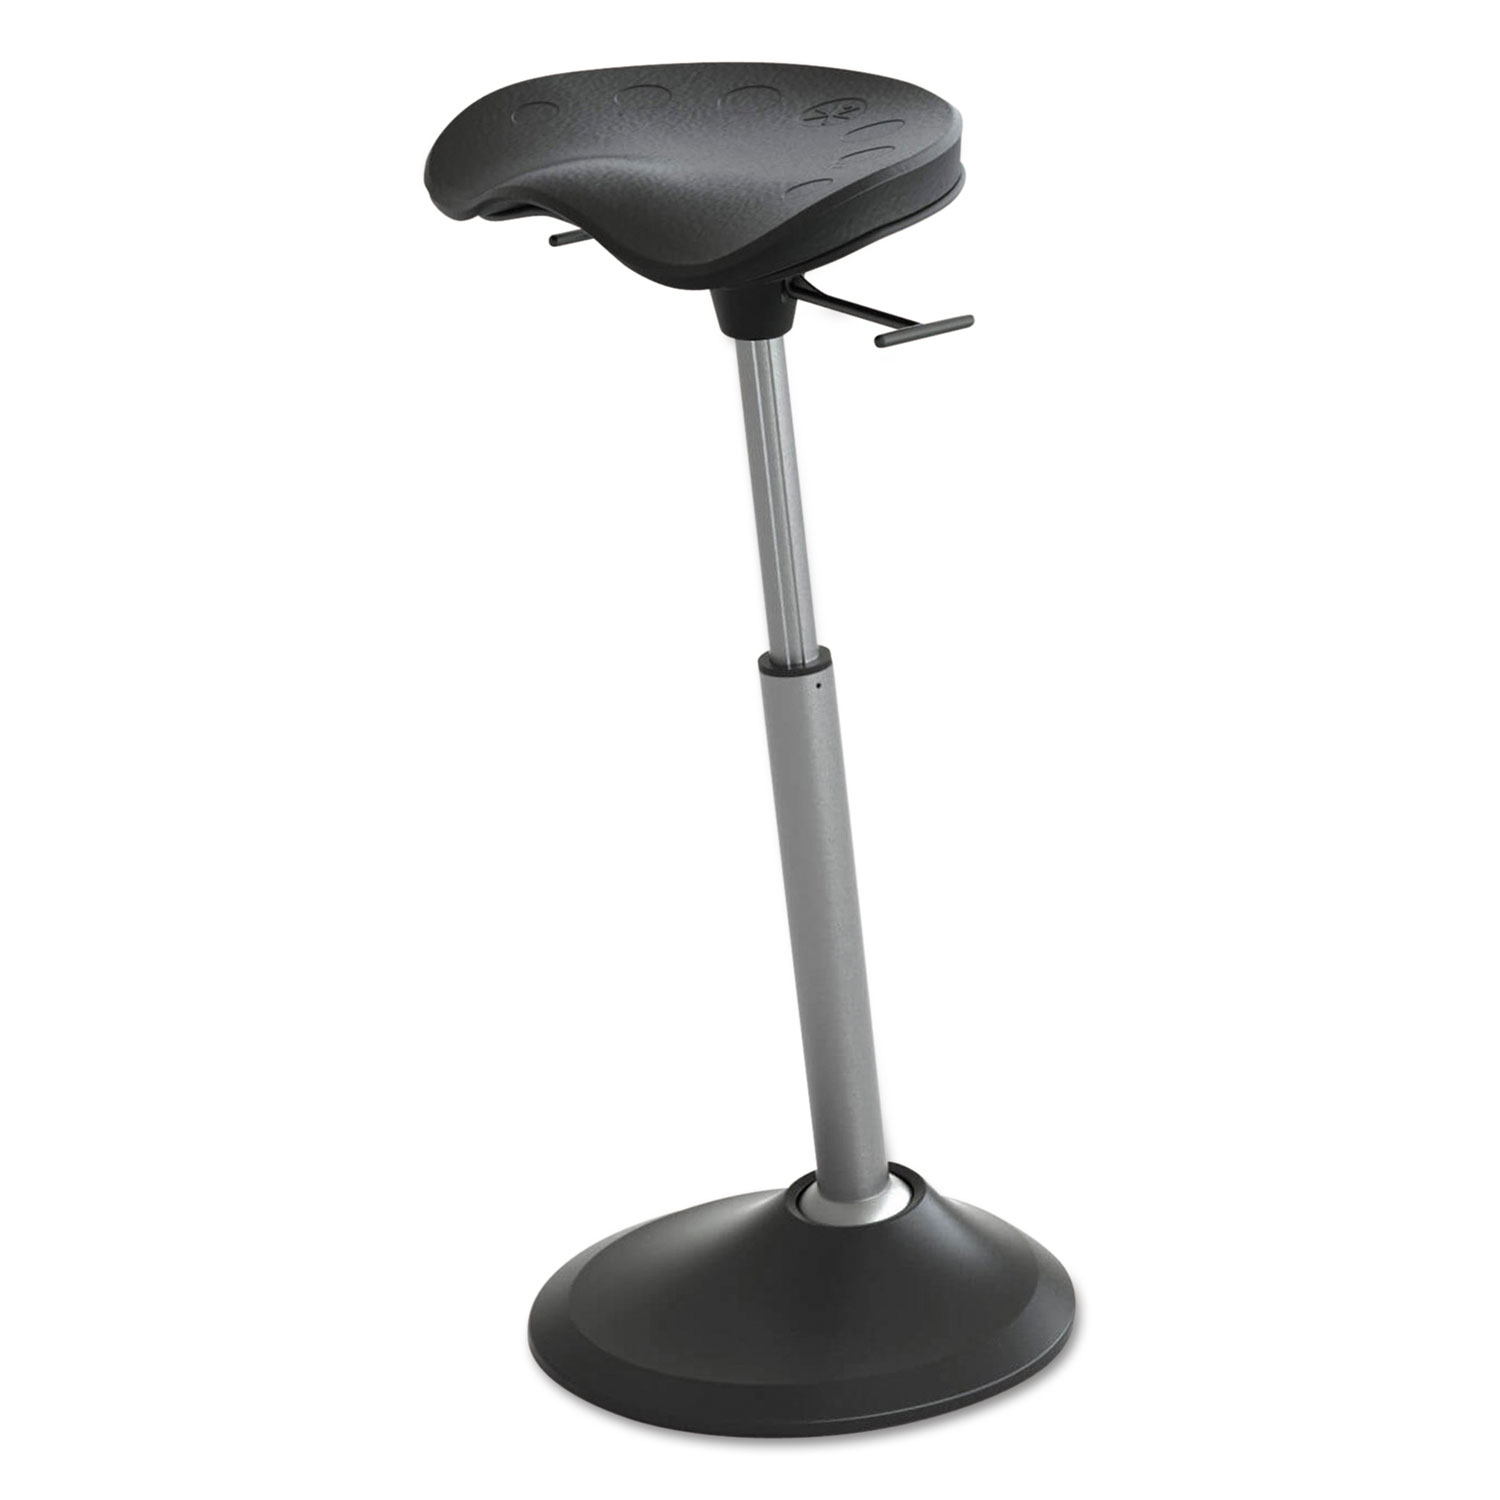 Mobis II Seat by Focal Upright, Black with Black Base